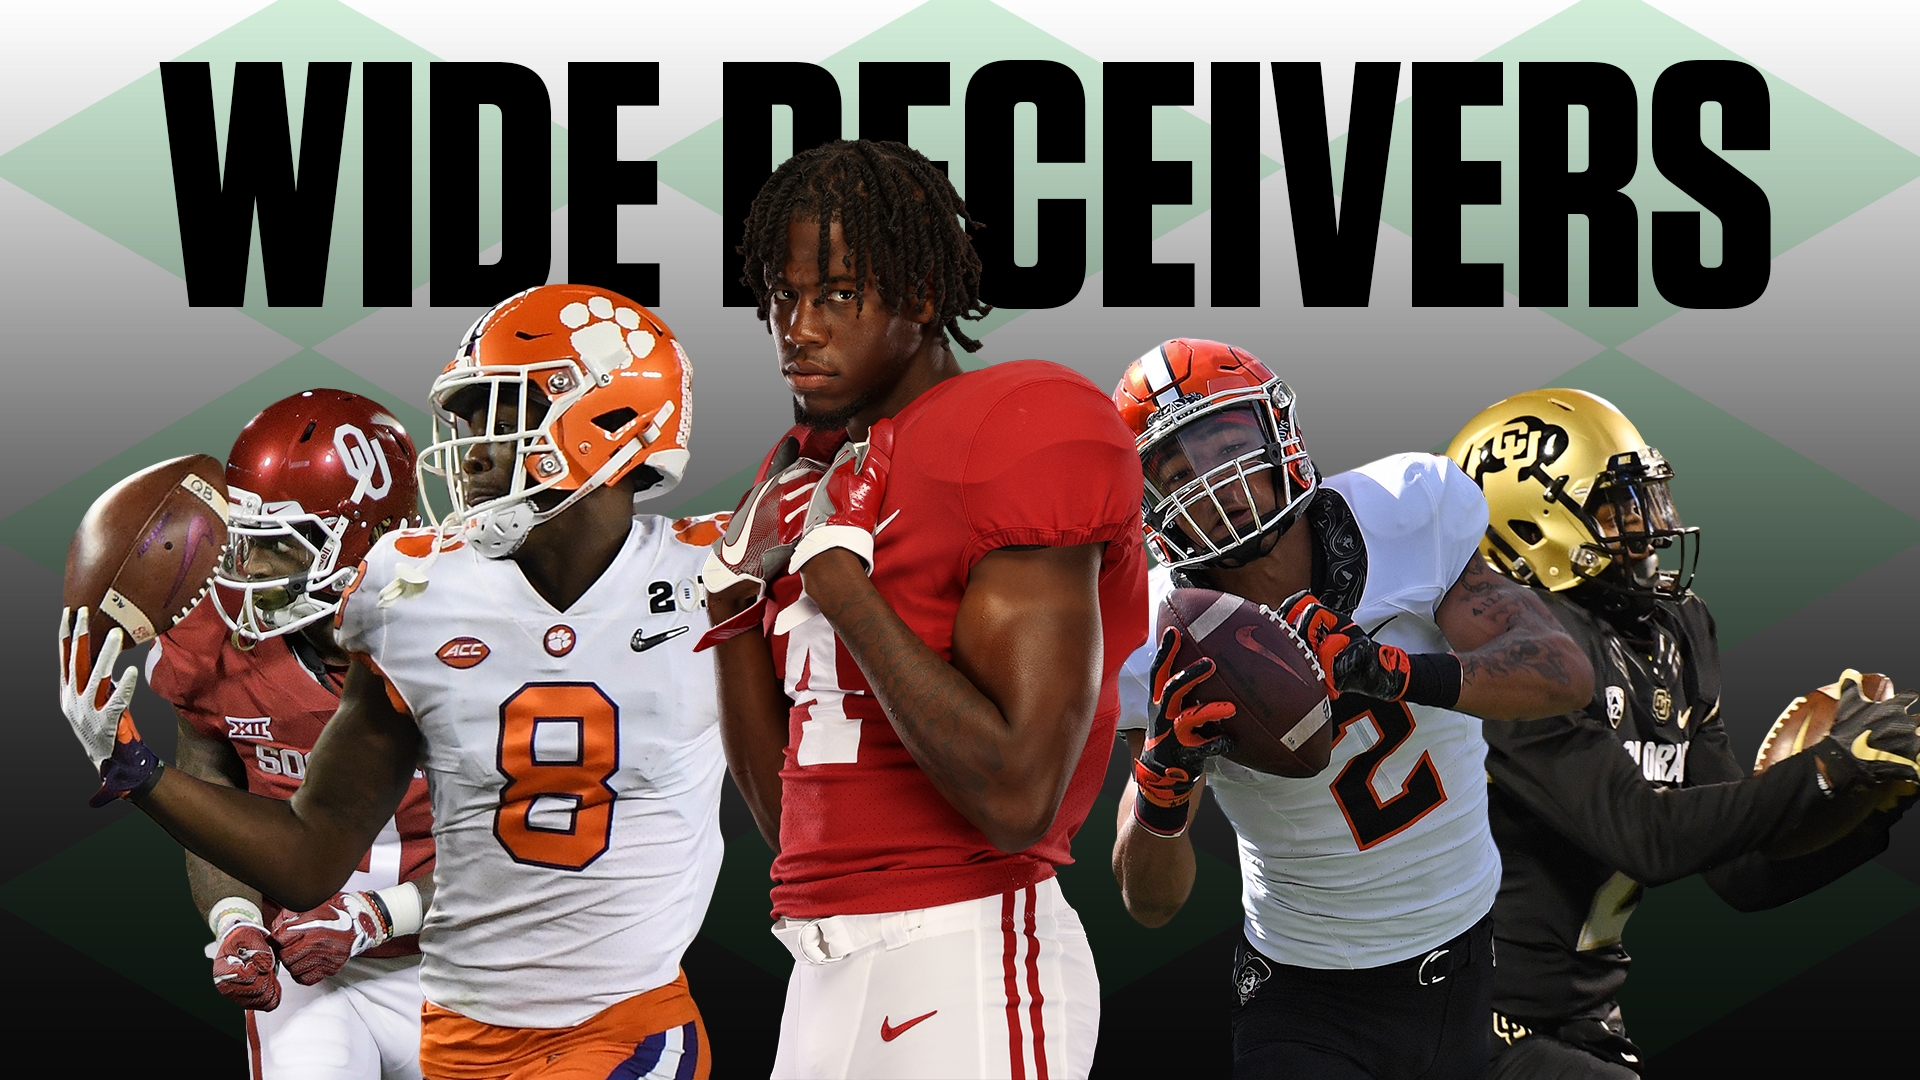 The best wide receivers in college football - Stream the Video